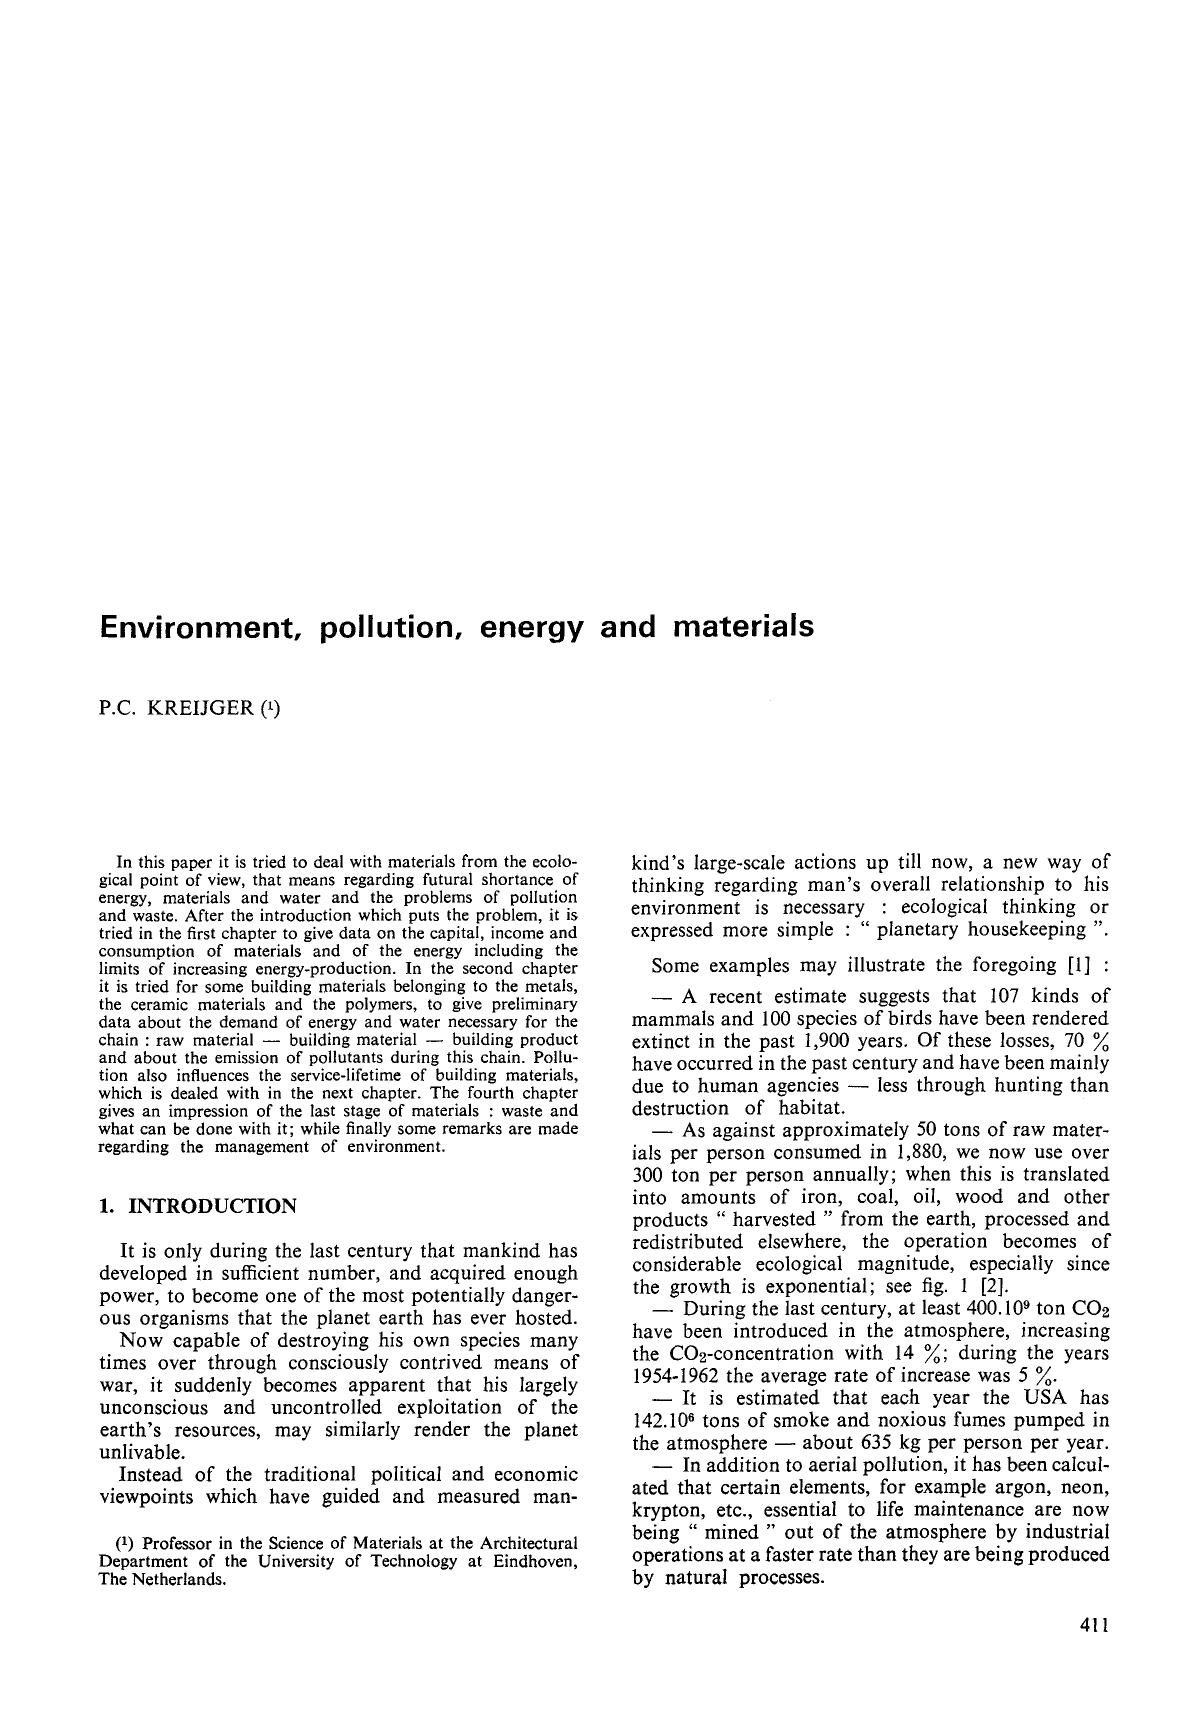 Environment, pollution, energy and materials by Unknown